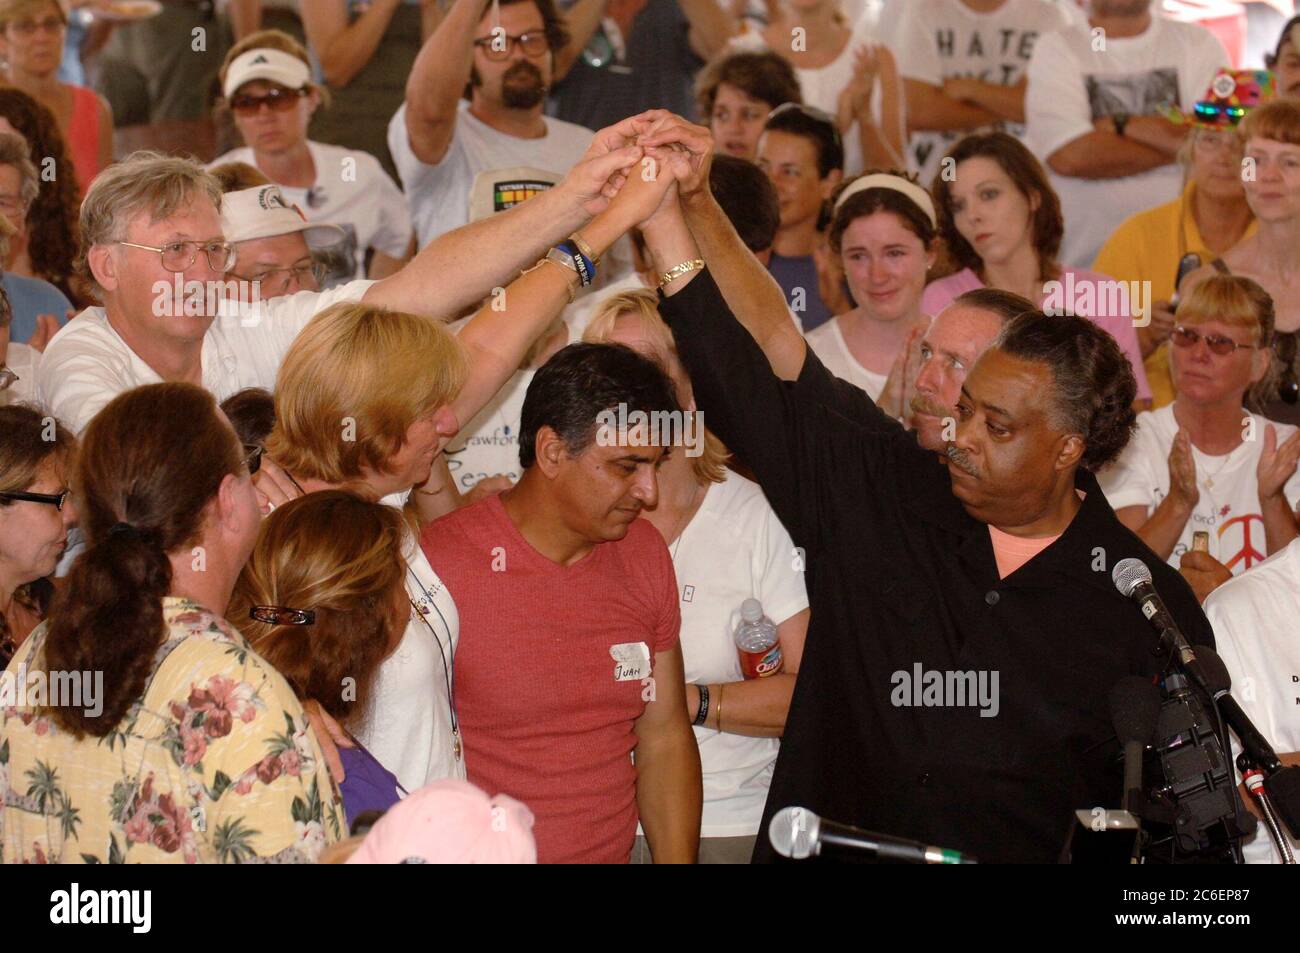 Crawford, Texas August 28, 2005: Anti-war activist Cindy Sheehan (left) and others clasp hands with Rev. Al Sharpton as Sharpton conducts a church service at Camp Casey II near U.S. President George W. Bush's Texas ranch.  Sheehan, whose son Casey died in action in Iraq in 2004, has organized a series of protests near the Bushes' Texas ranch during the president's summer vacation there.  ©Bob Daemmrich Stock Photo